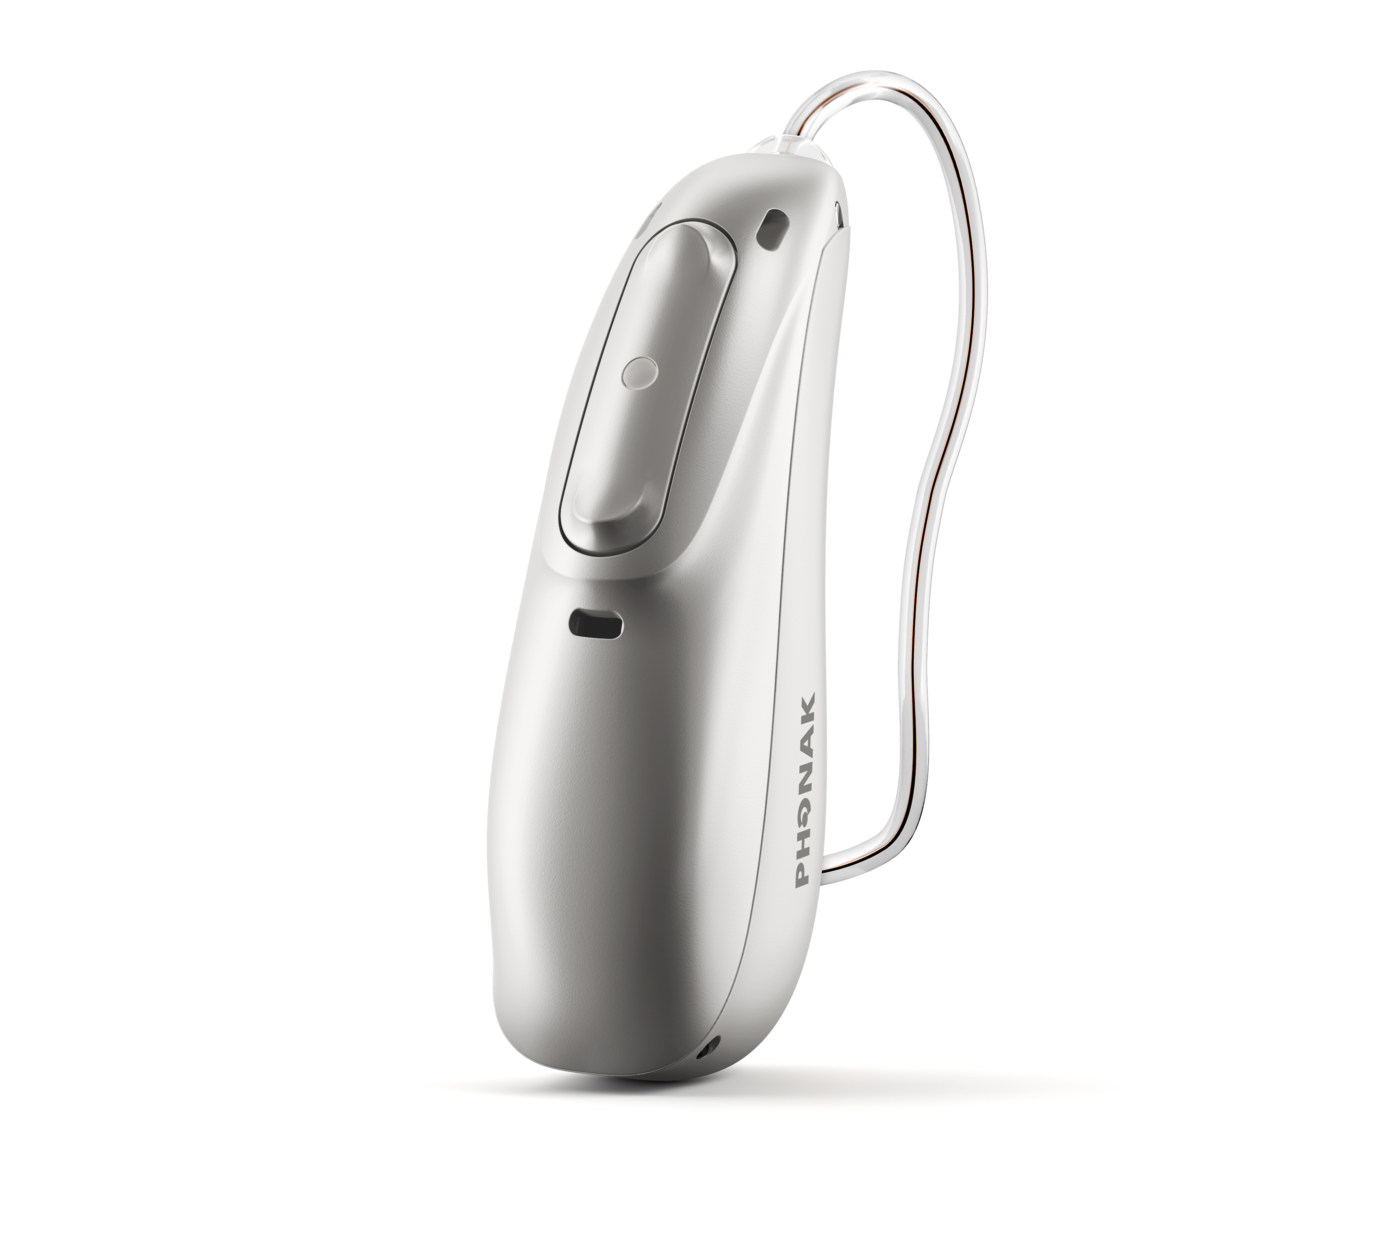 Phonak Audéo Lumity L-P Receiver-in-Canal hearing aid.